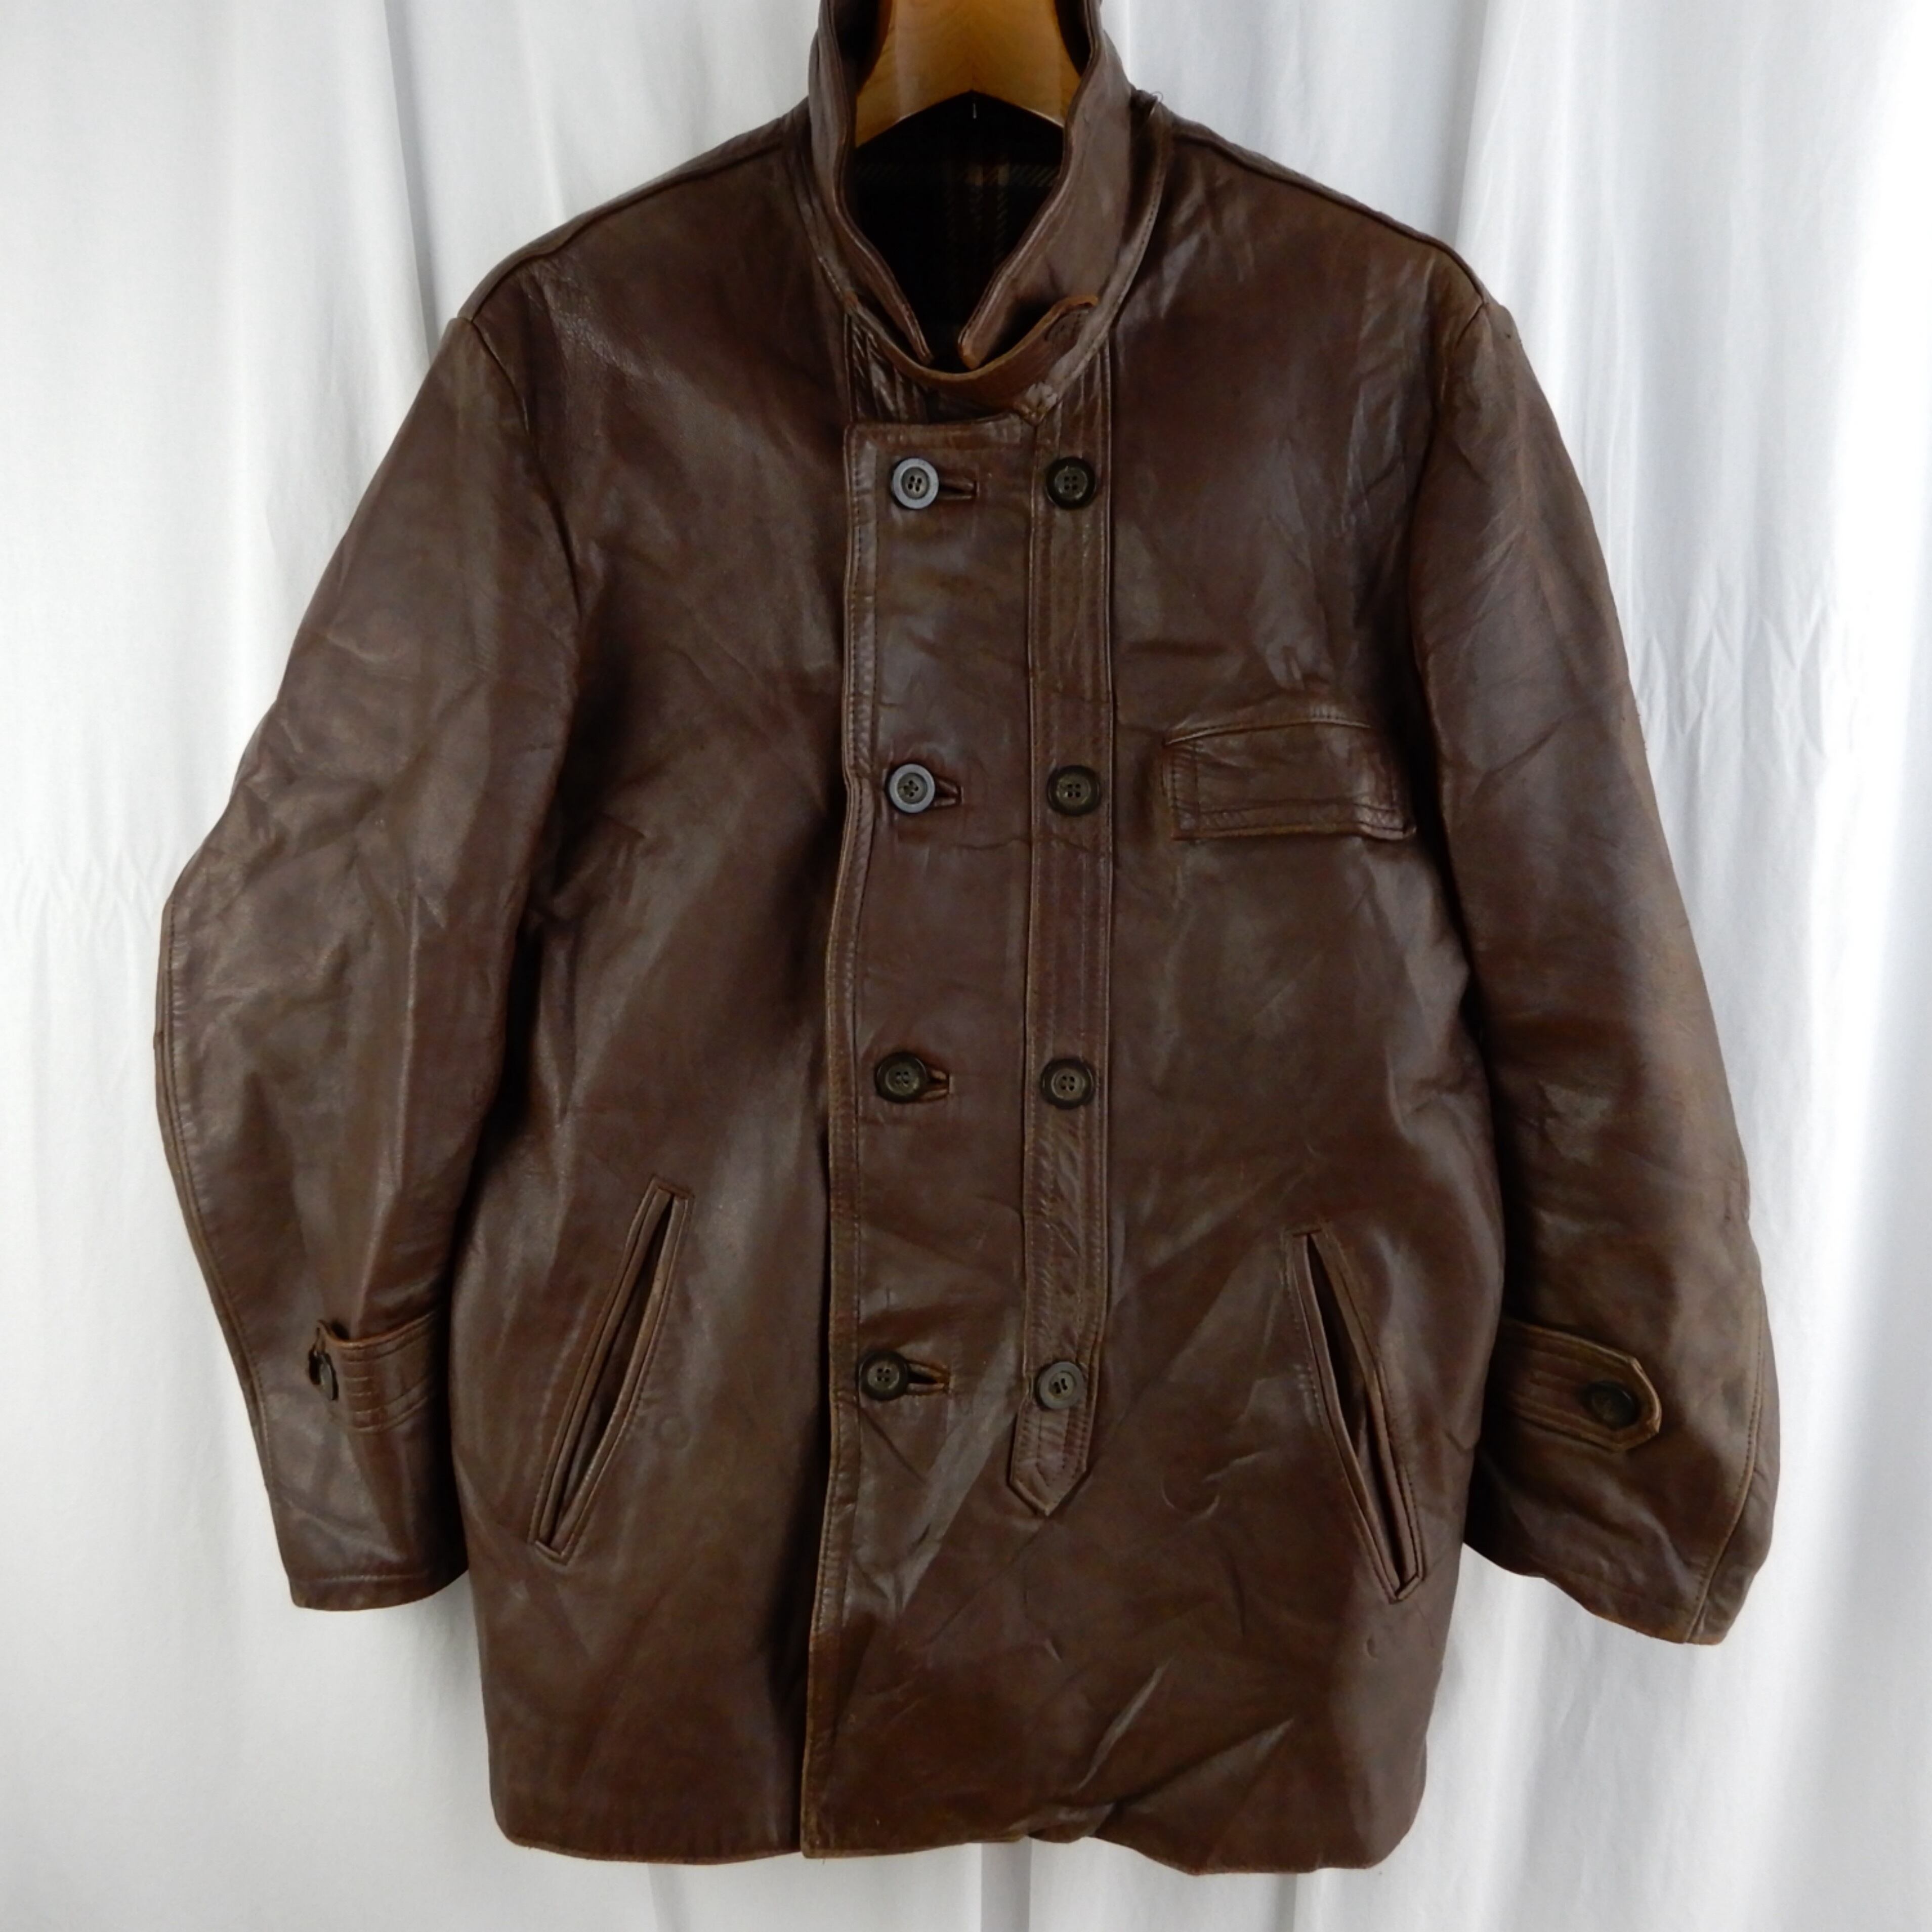 INTER VET PARIS French Work Leather Jacket s〜 BROWN Le